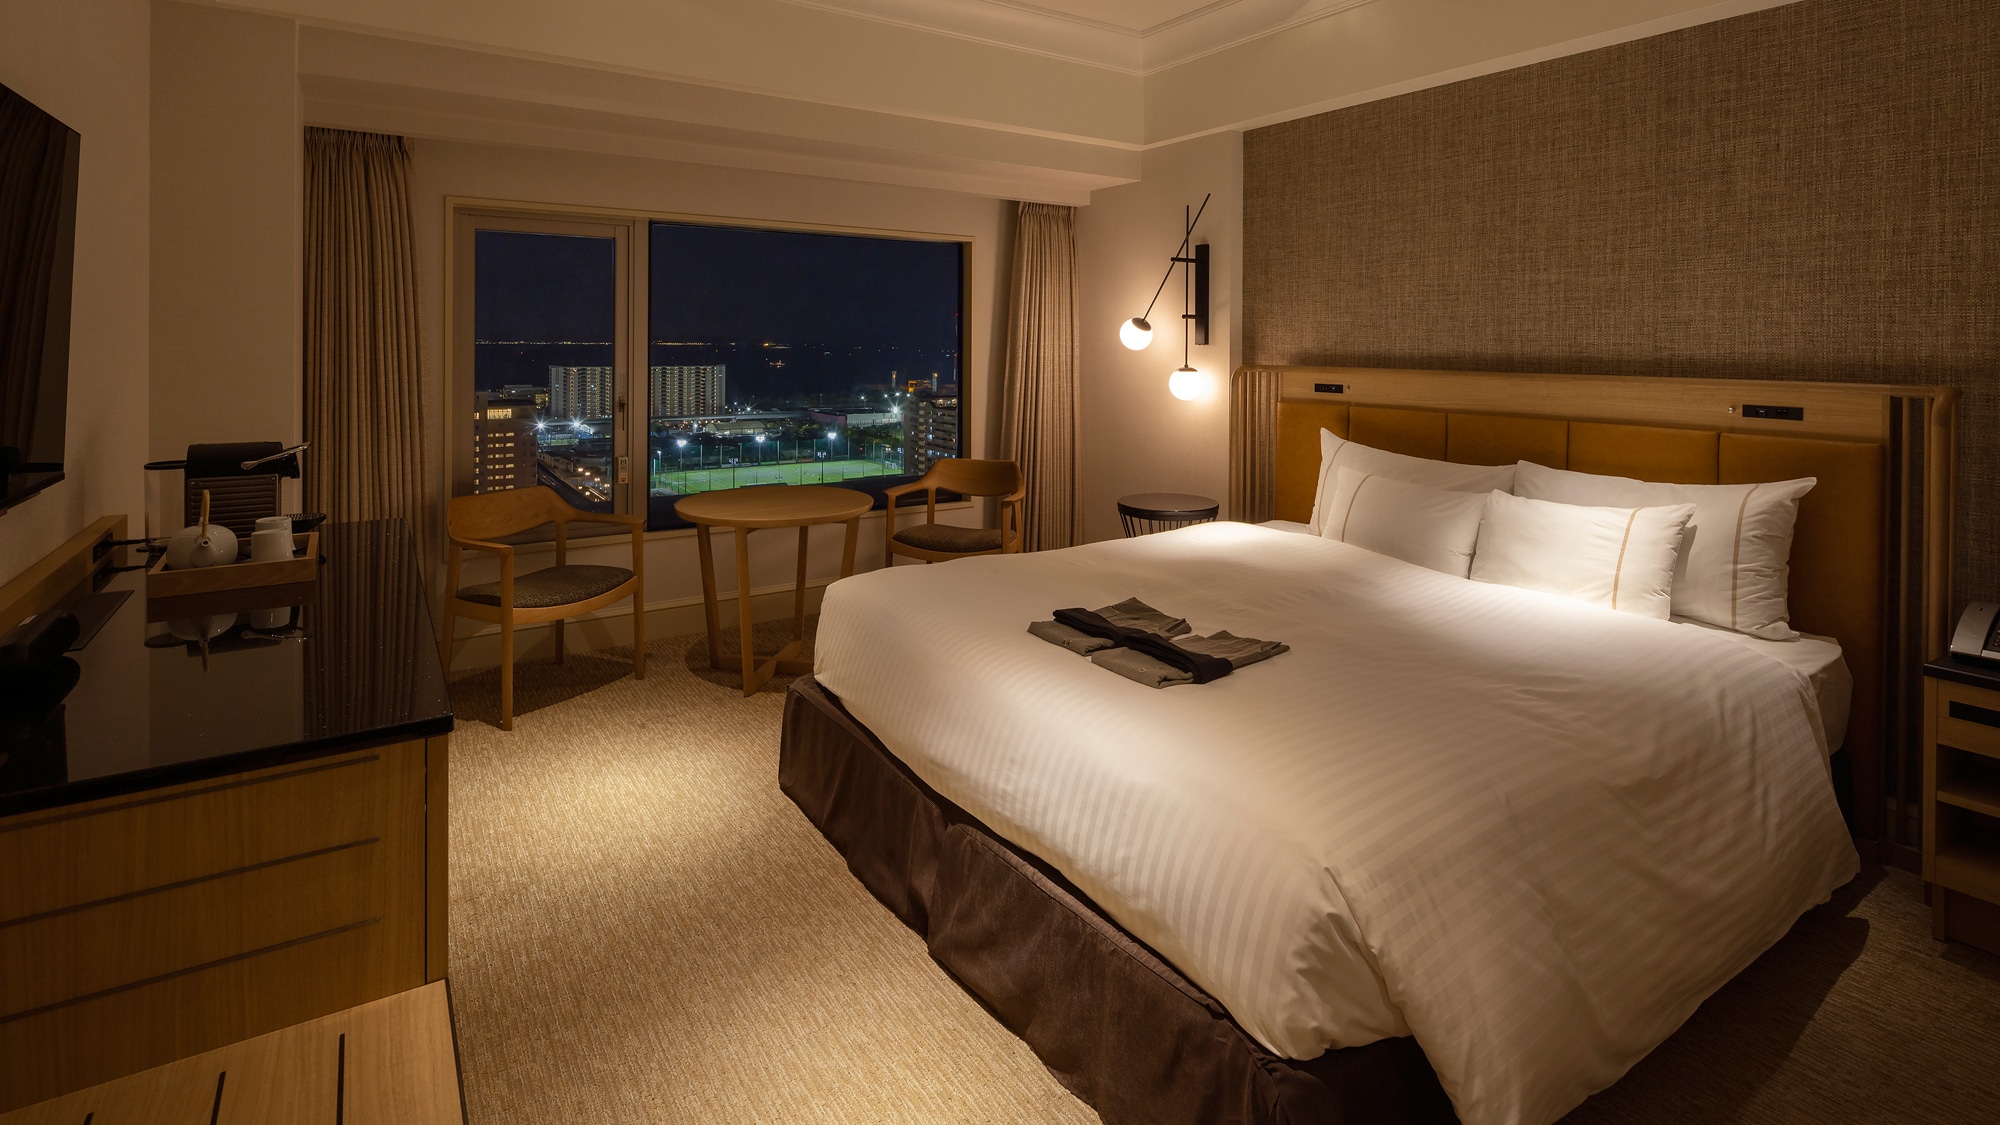 [Club Double] 28 square meters, 17-20th floor, sea side. "Sheraton Signature Bed".